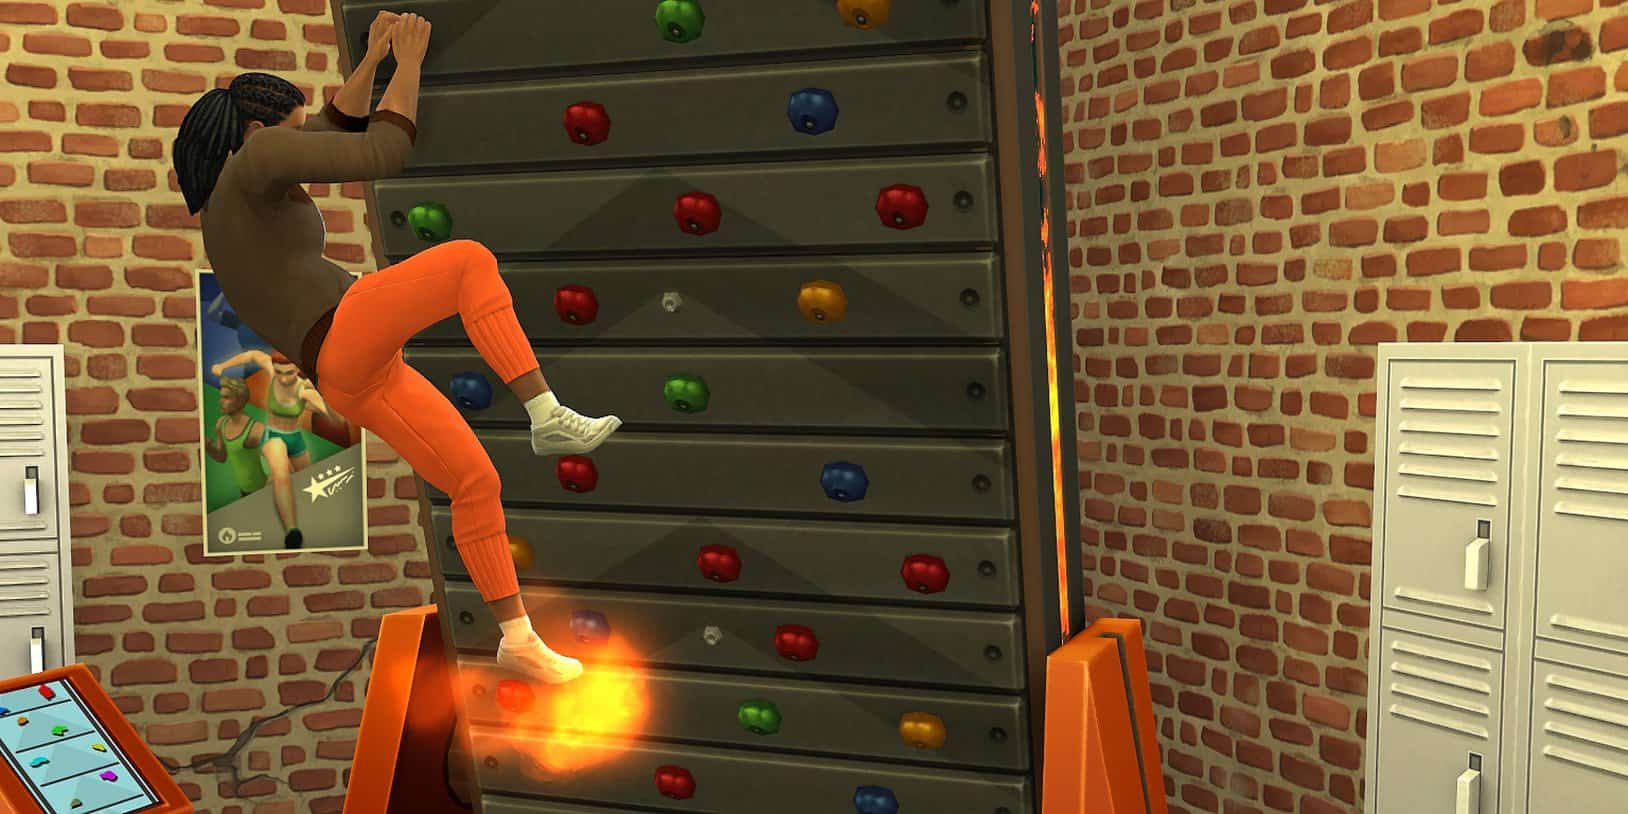 A Sim is doing the fiery climbing challenge in The Sims 4.